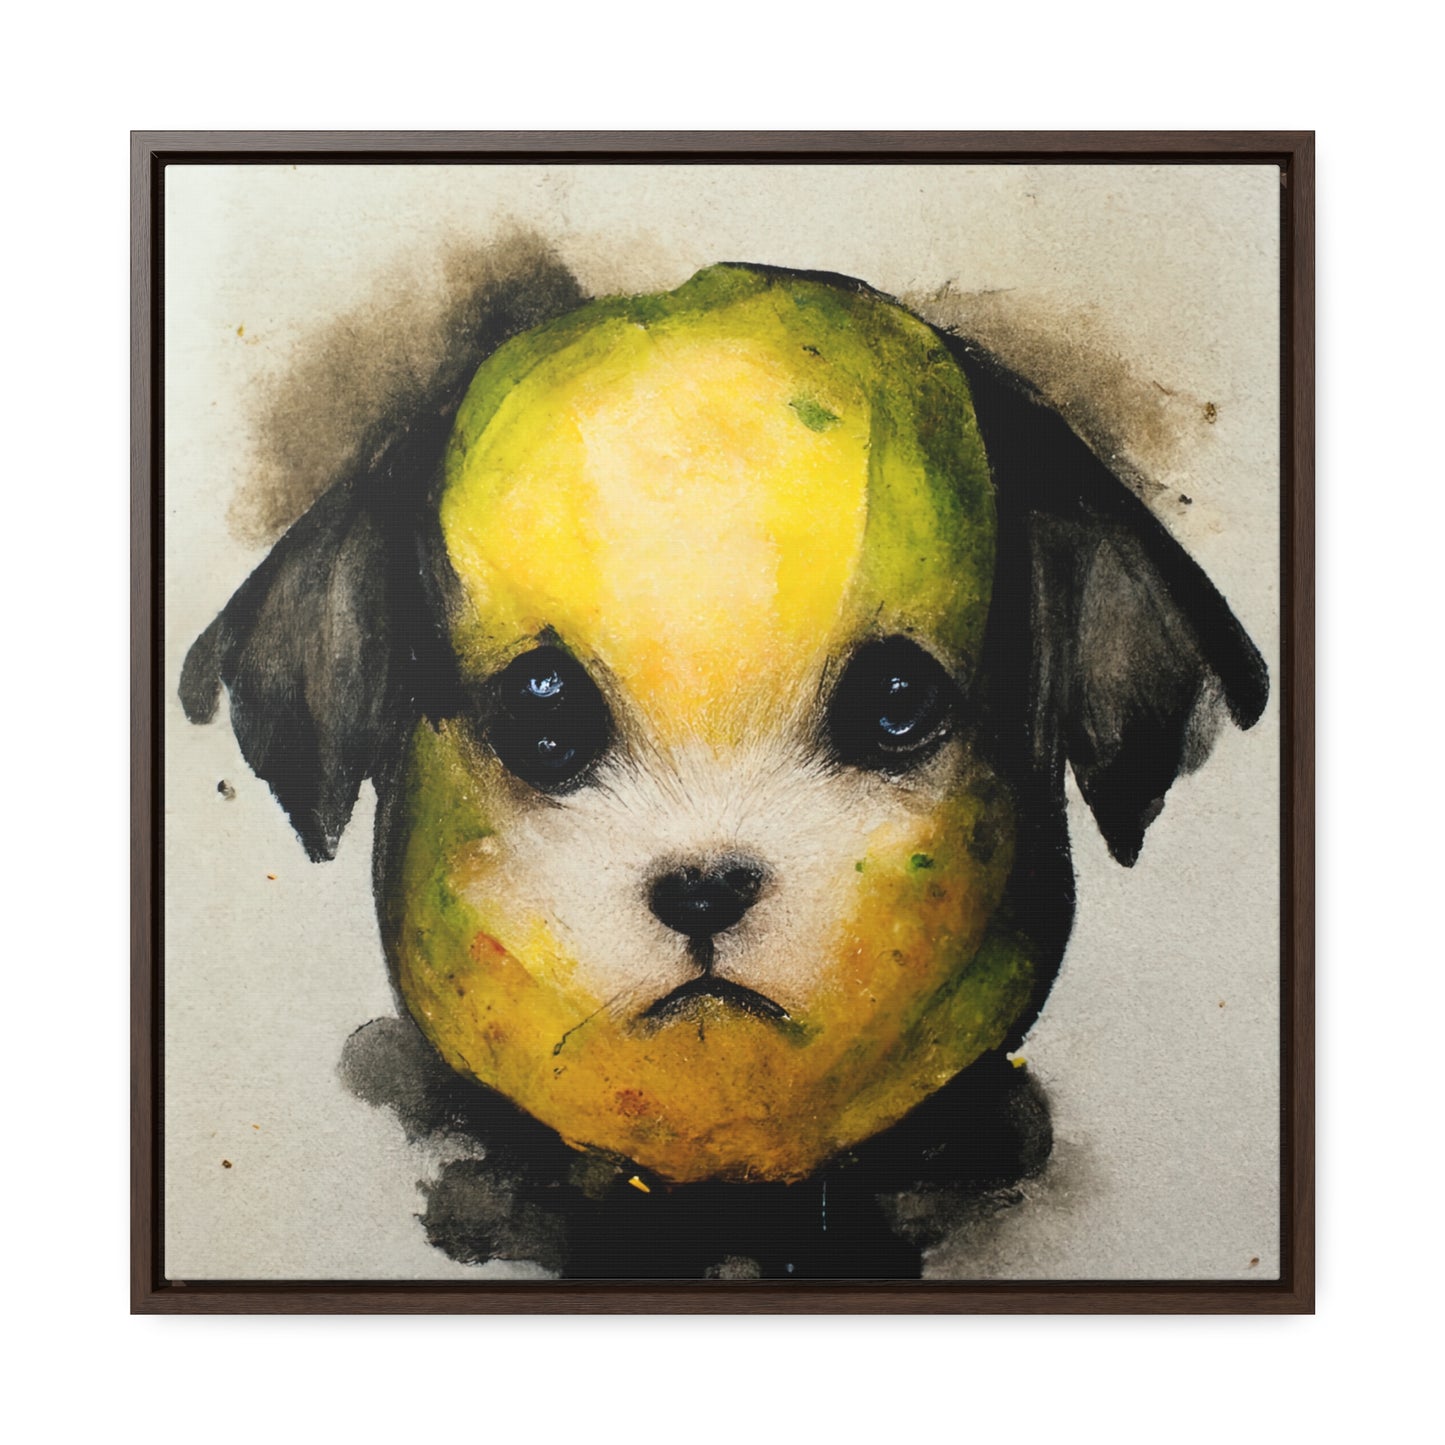 Dogs and Puppies 8, Valentinii, Gallery Canvas Wraps, Square Frame